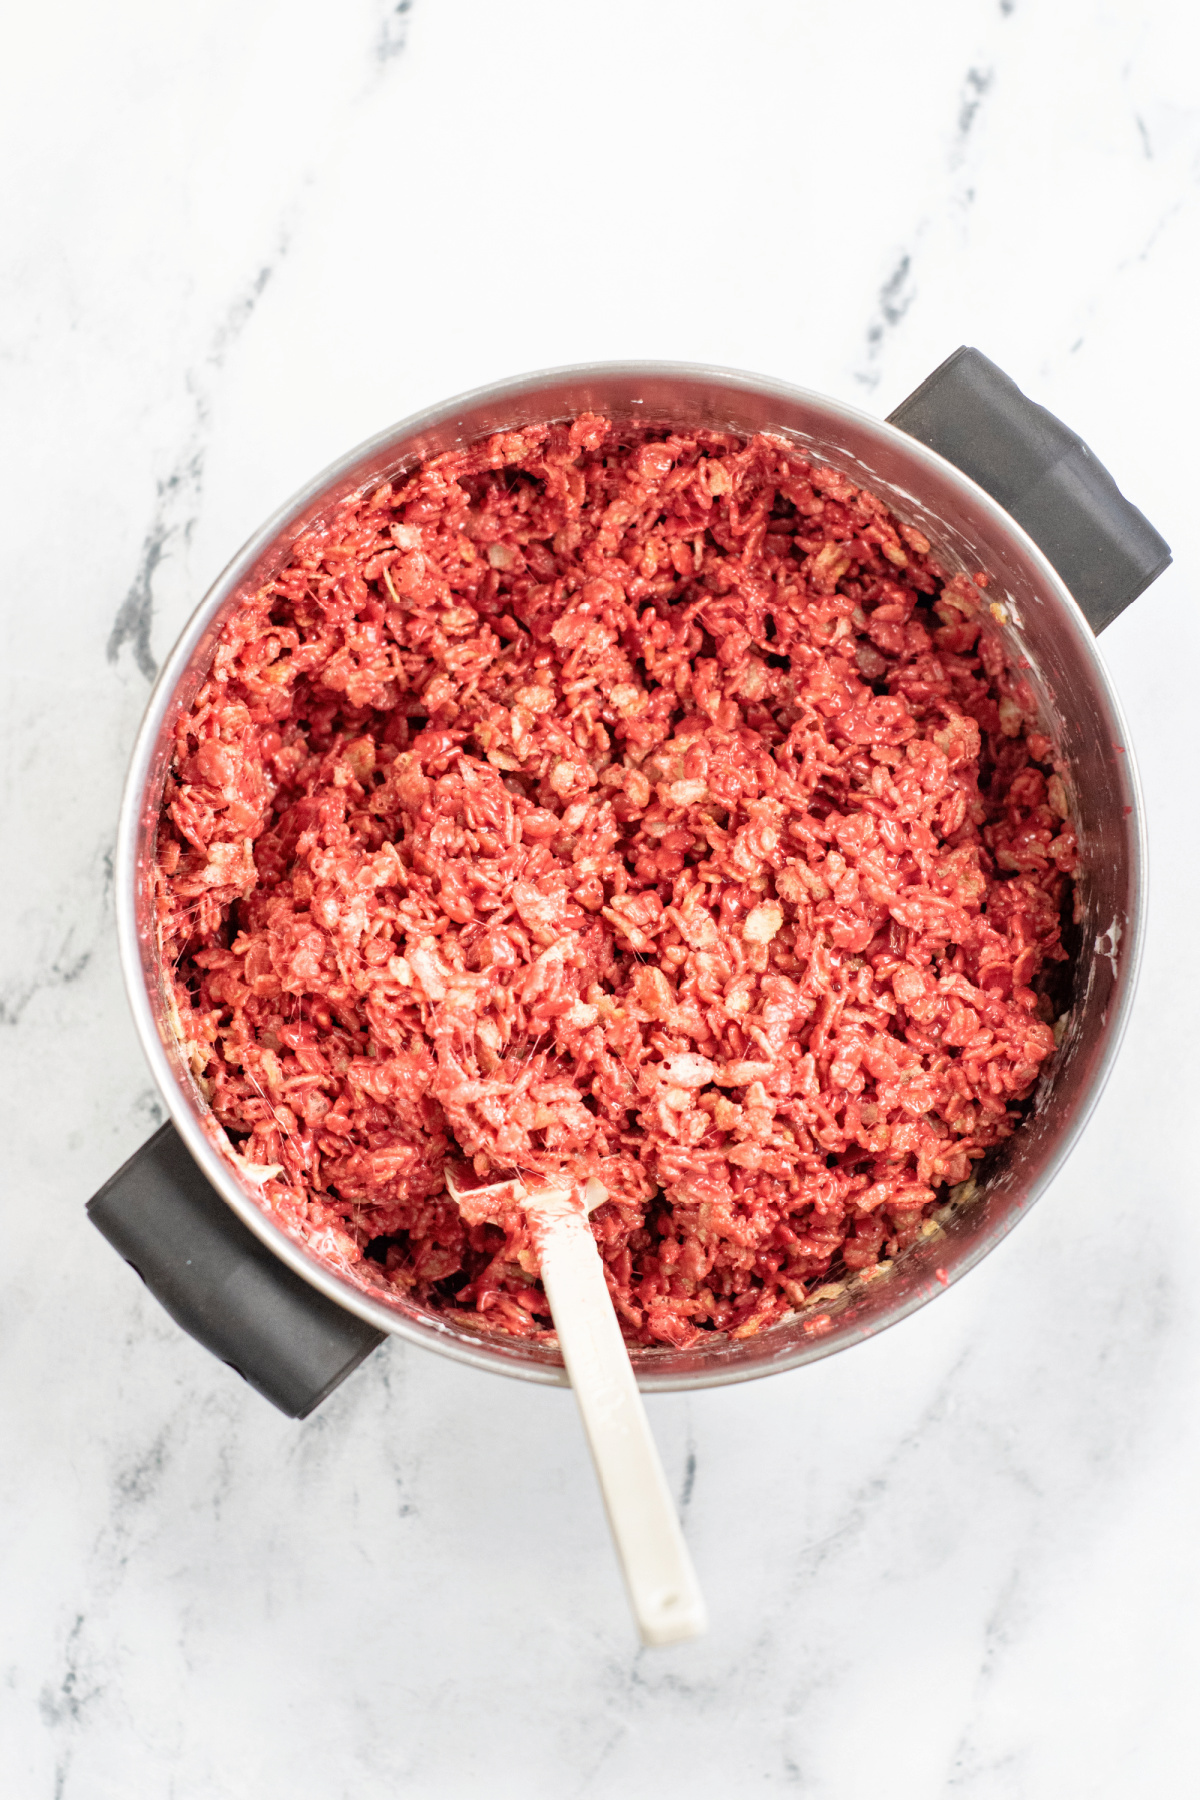 Mix Red Velvet Rice Krispie Treats in a pan with rubber spatula